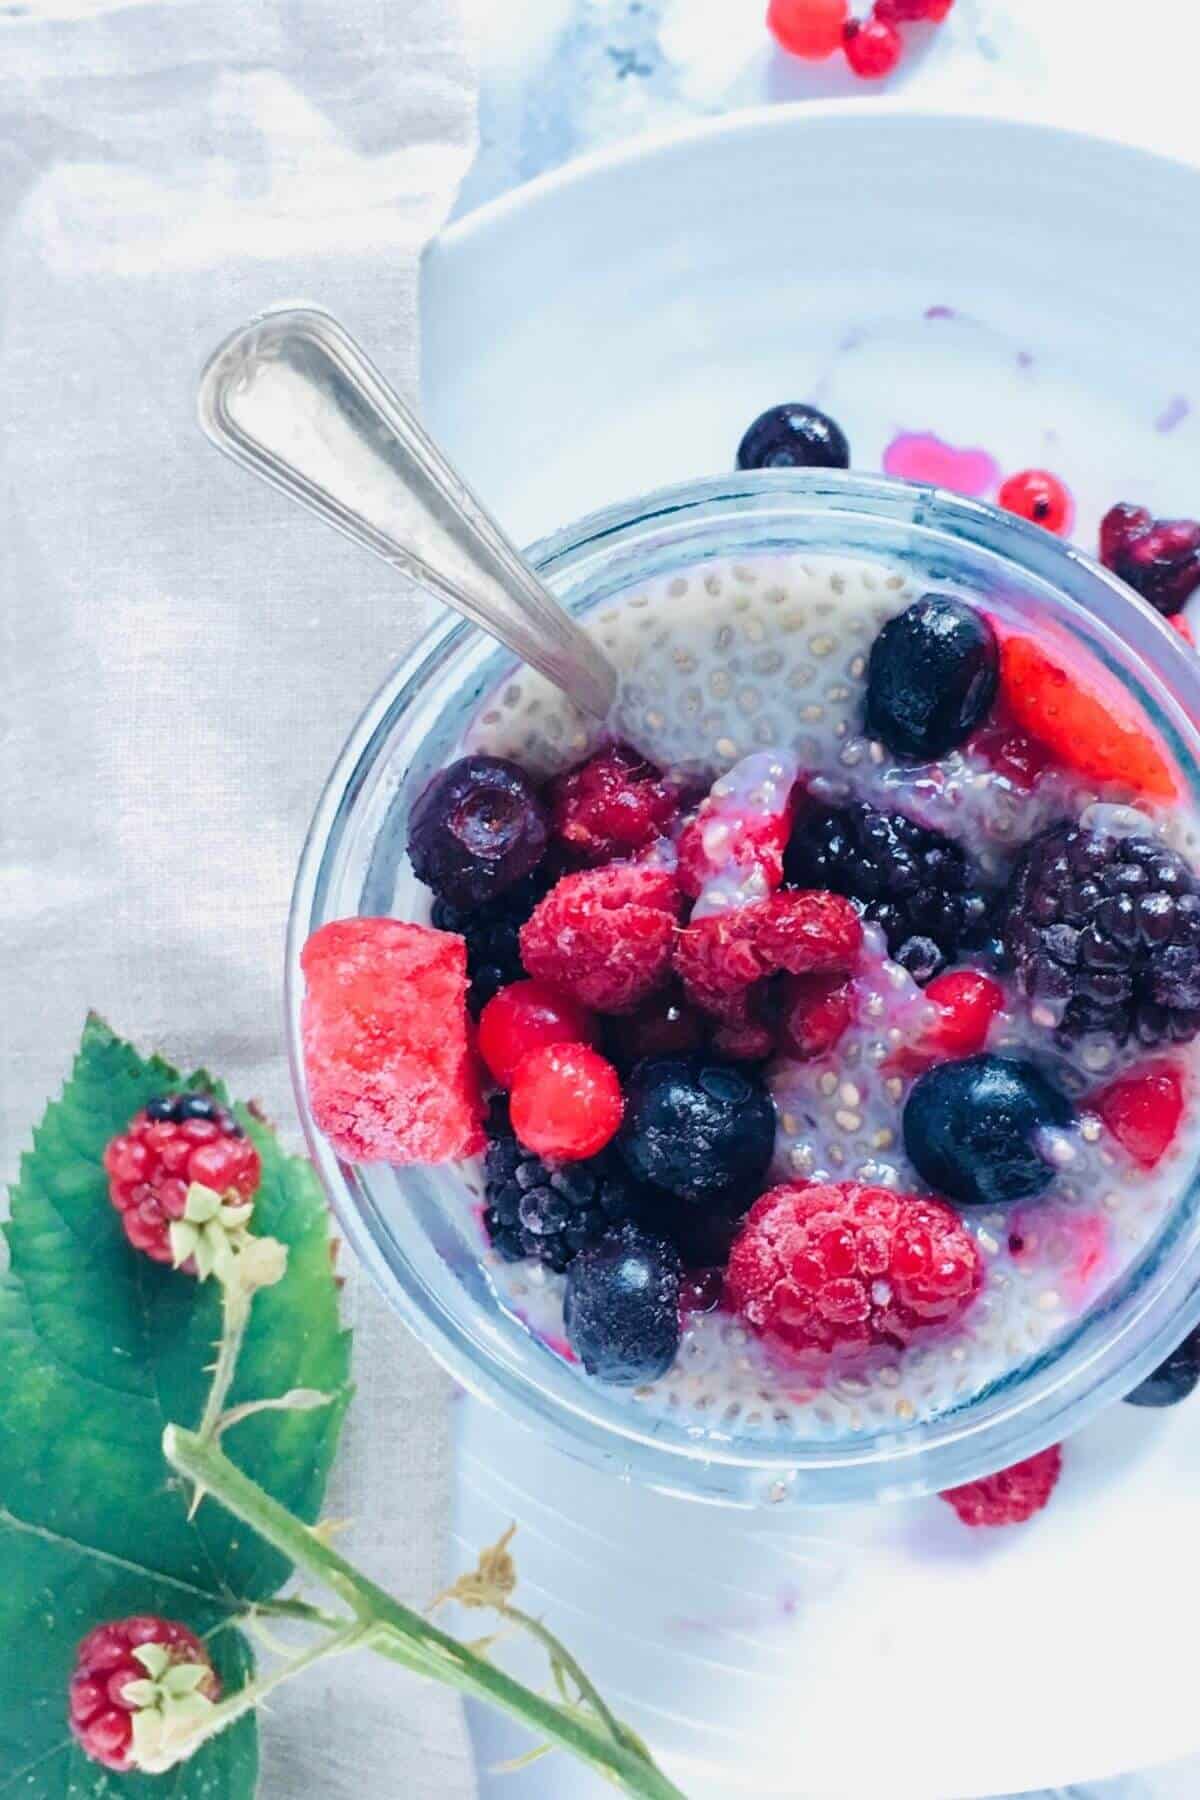 A glass filled with chia pudding and fresh berries.